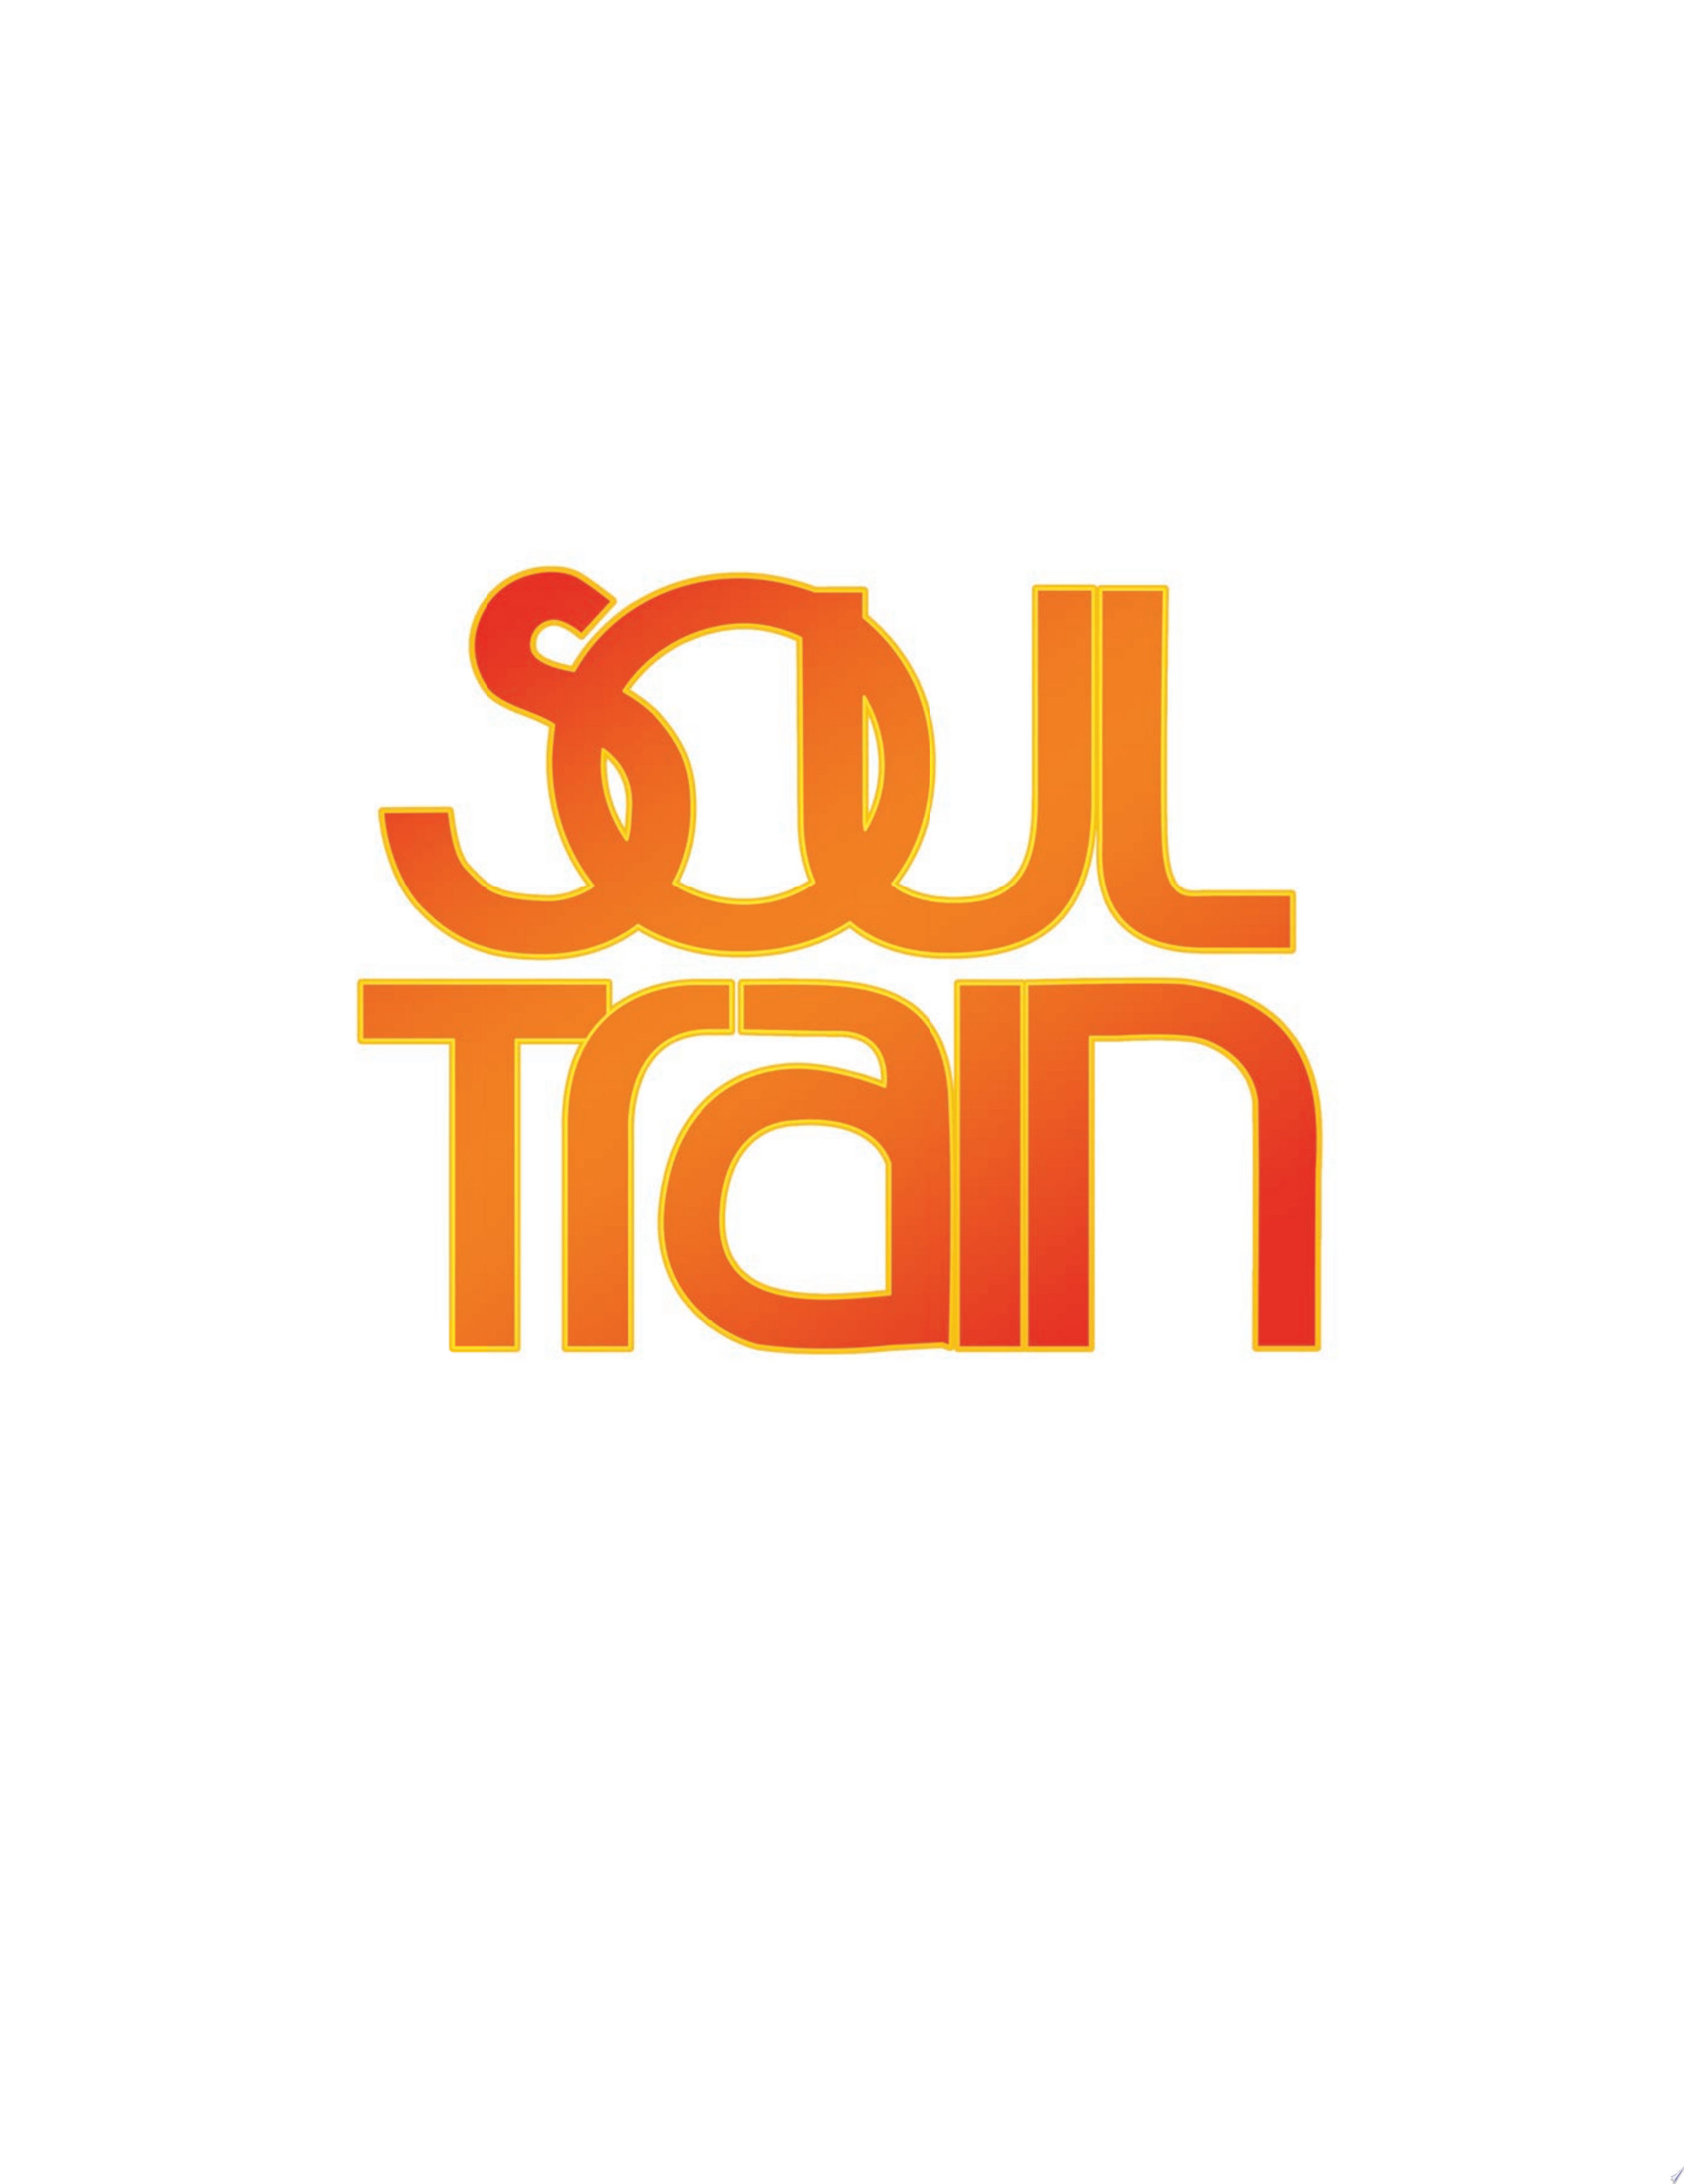 Image for "Soul Train"